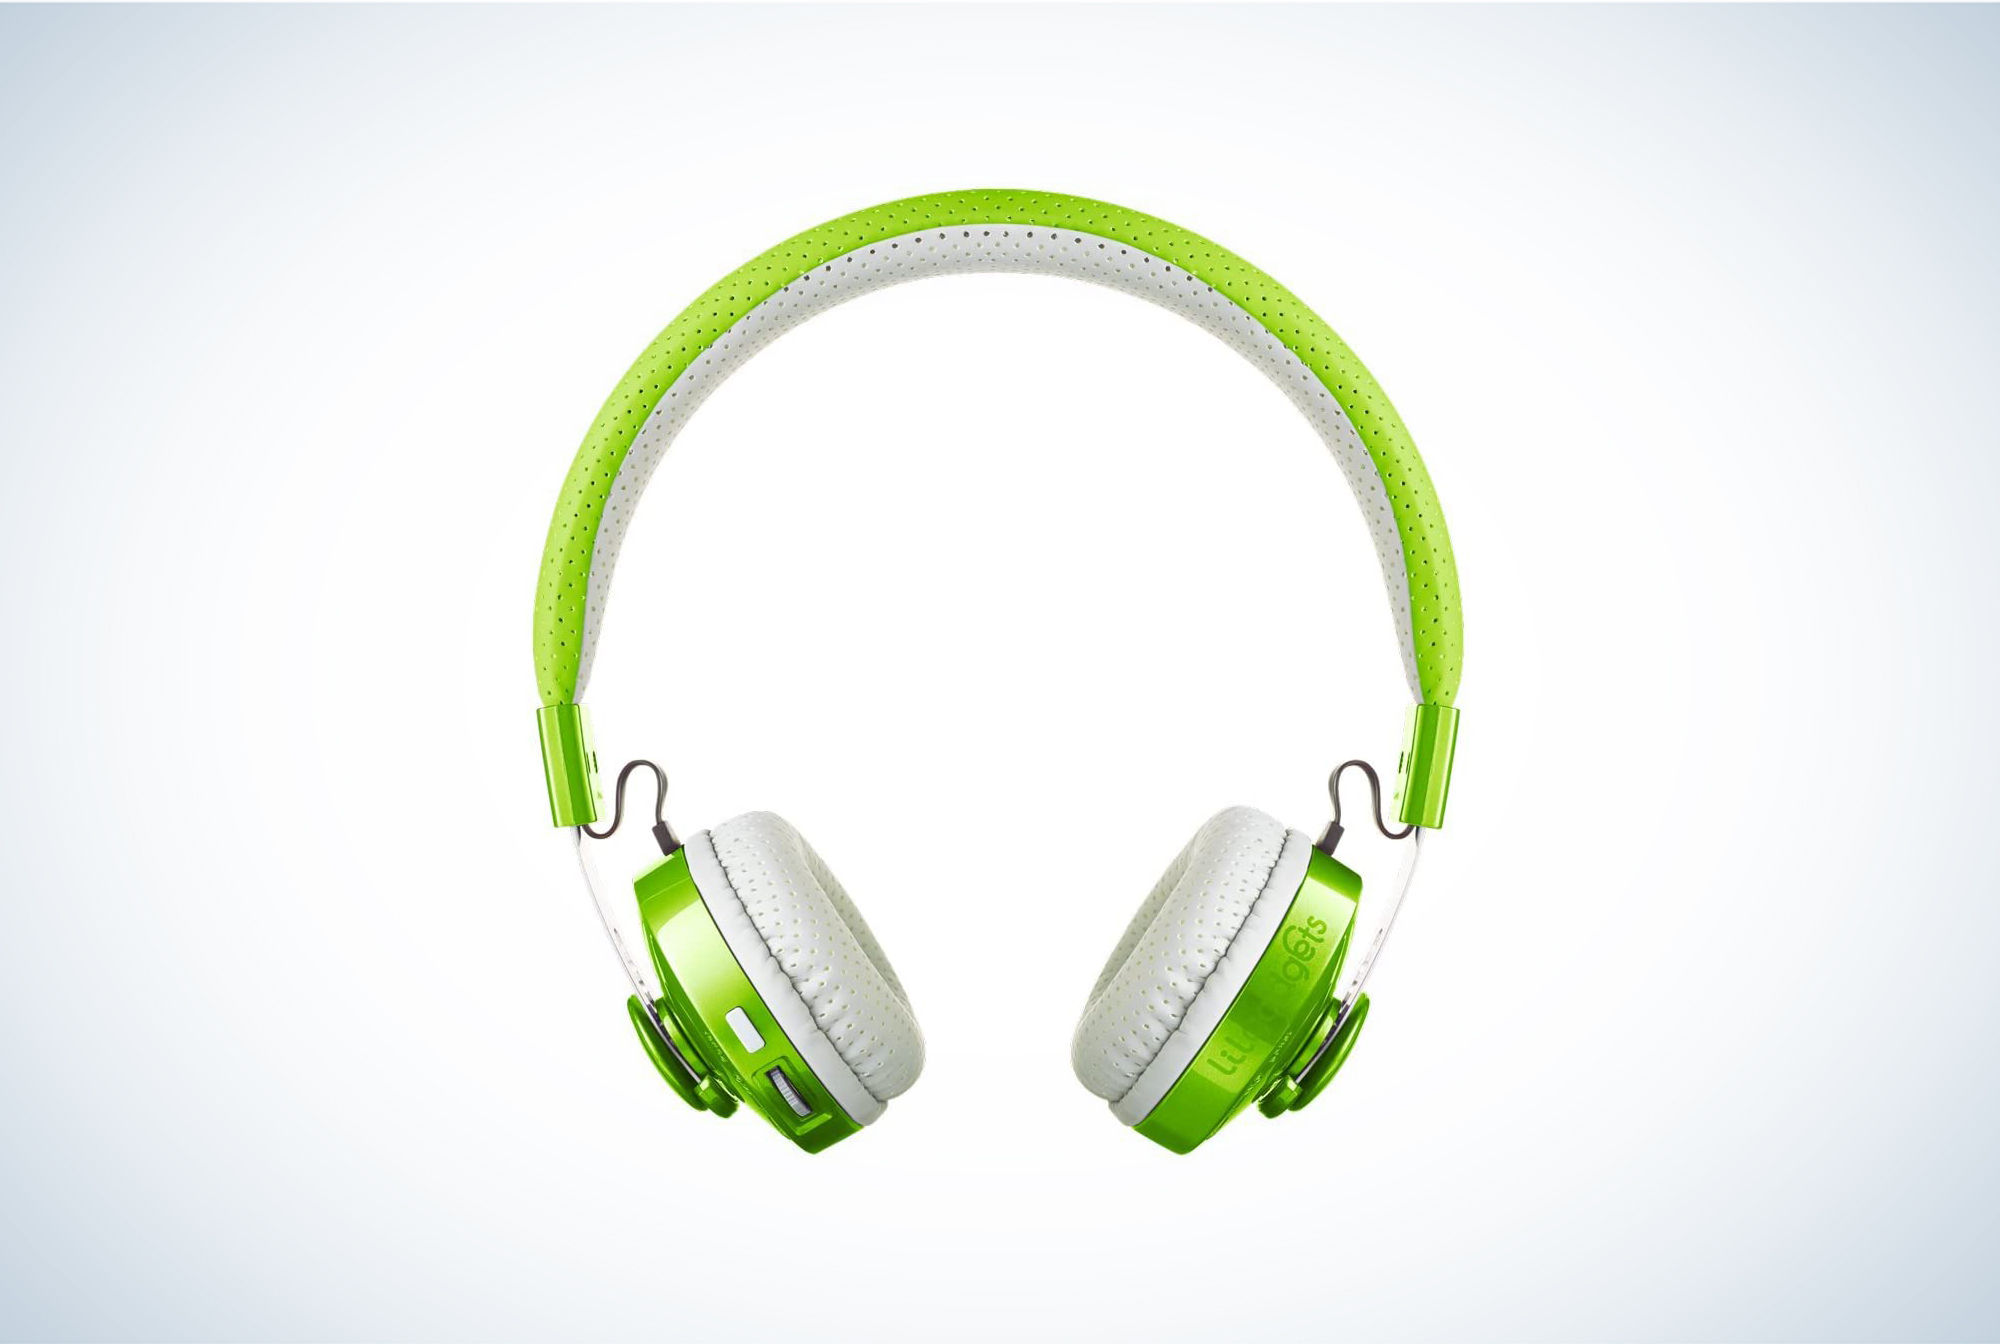 LilGadgets Untangled is our pick for the best kids' headphones.